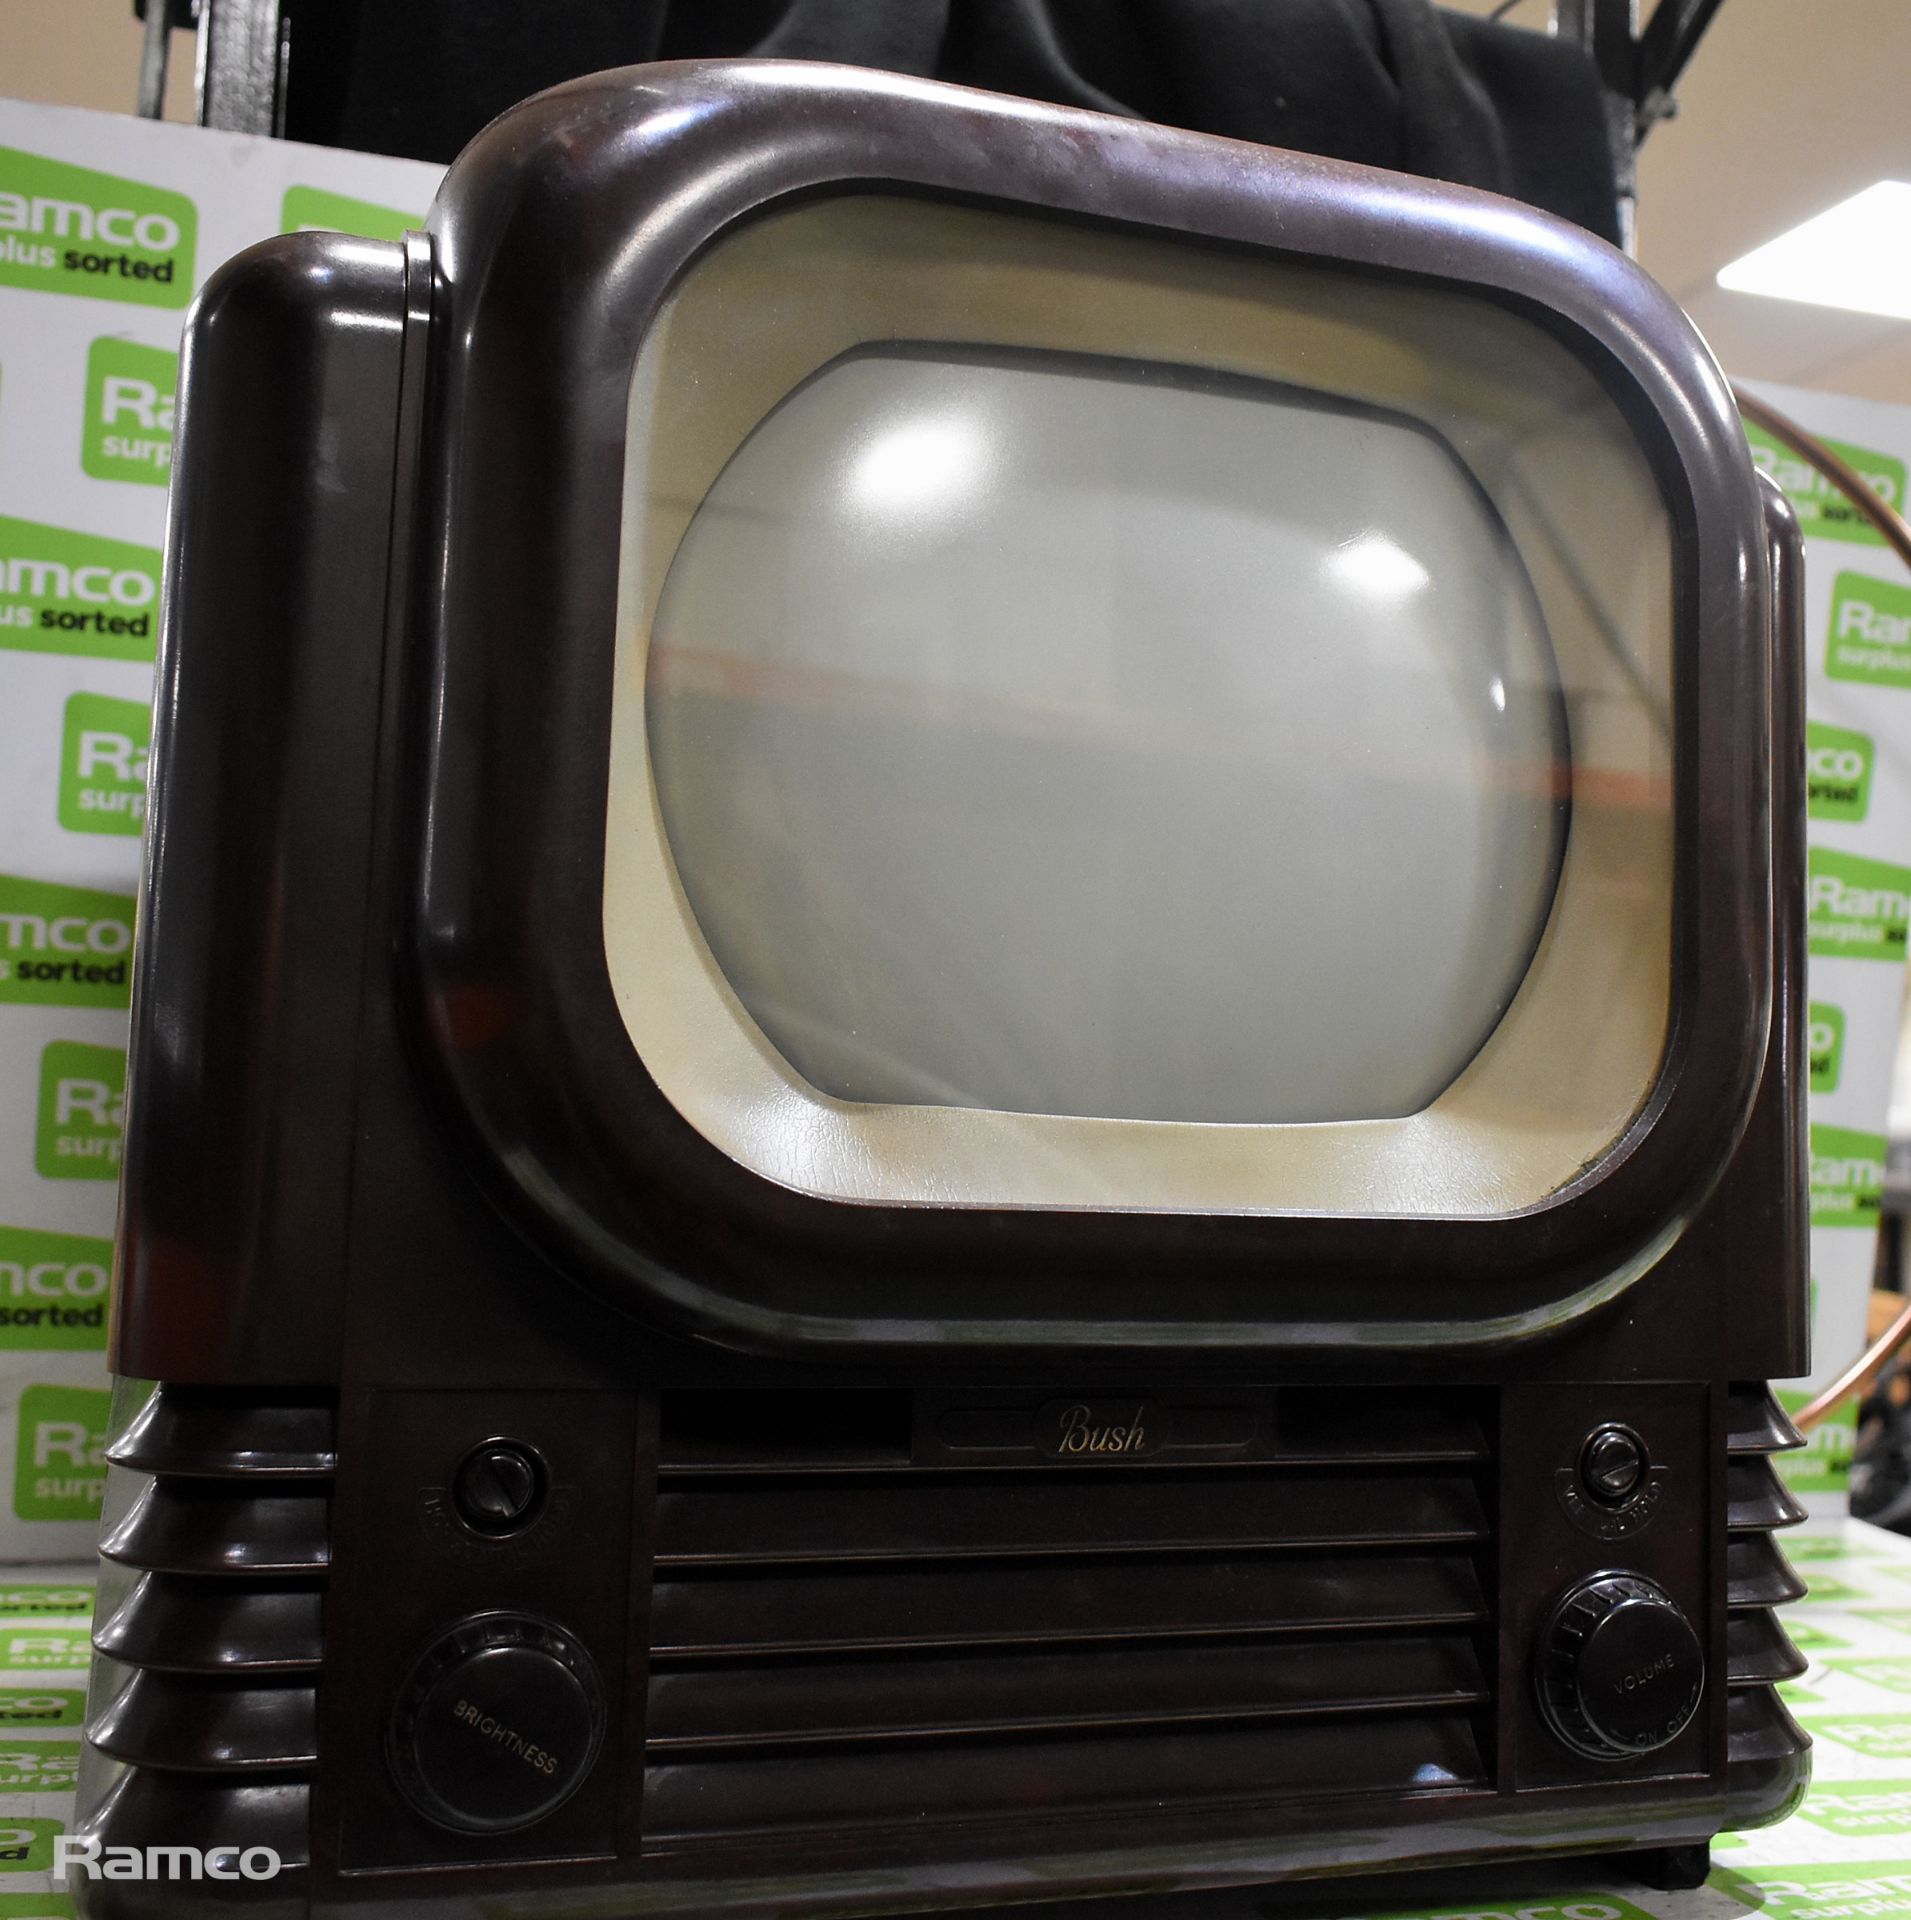 Bush TV 12 AM - 9 inch bakelite television with aerial - Image 2 of 10